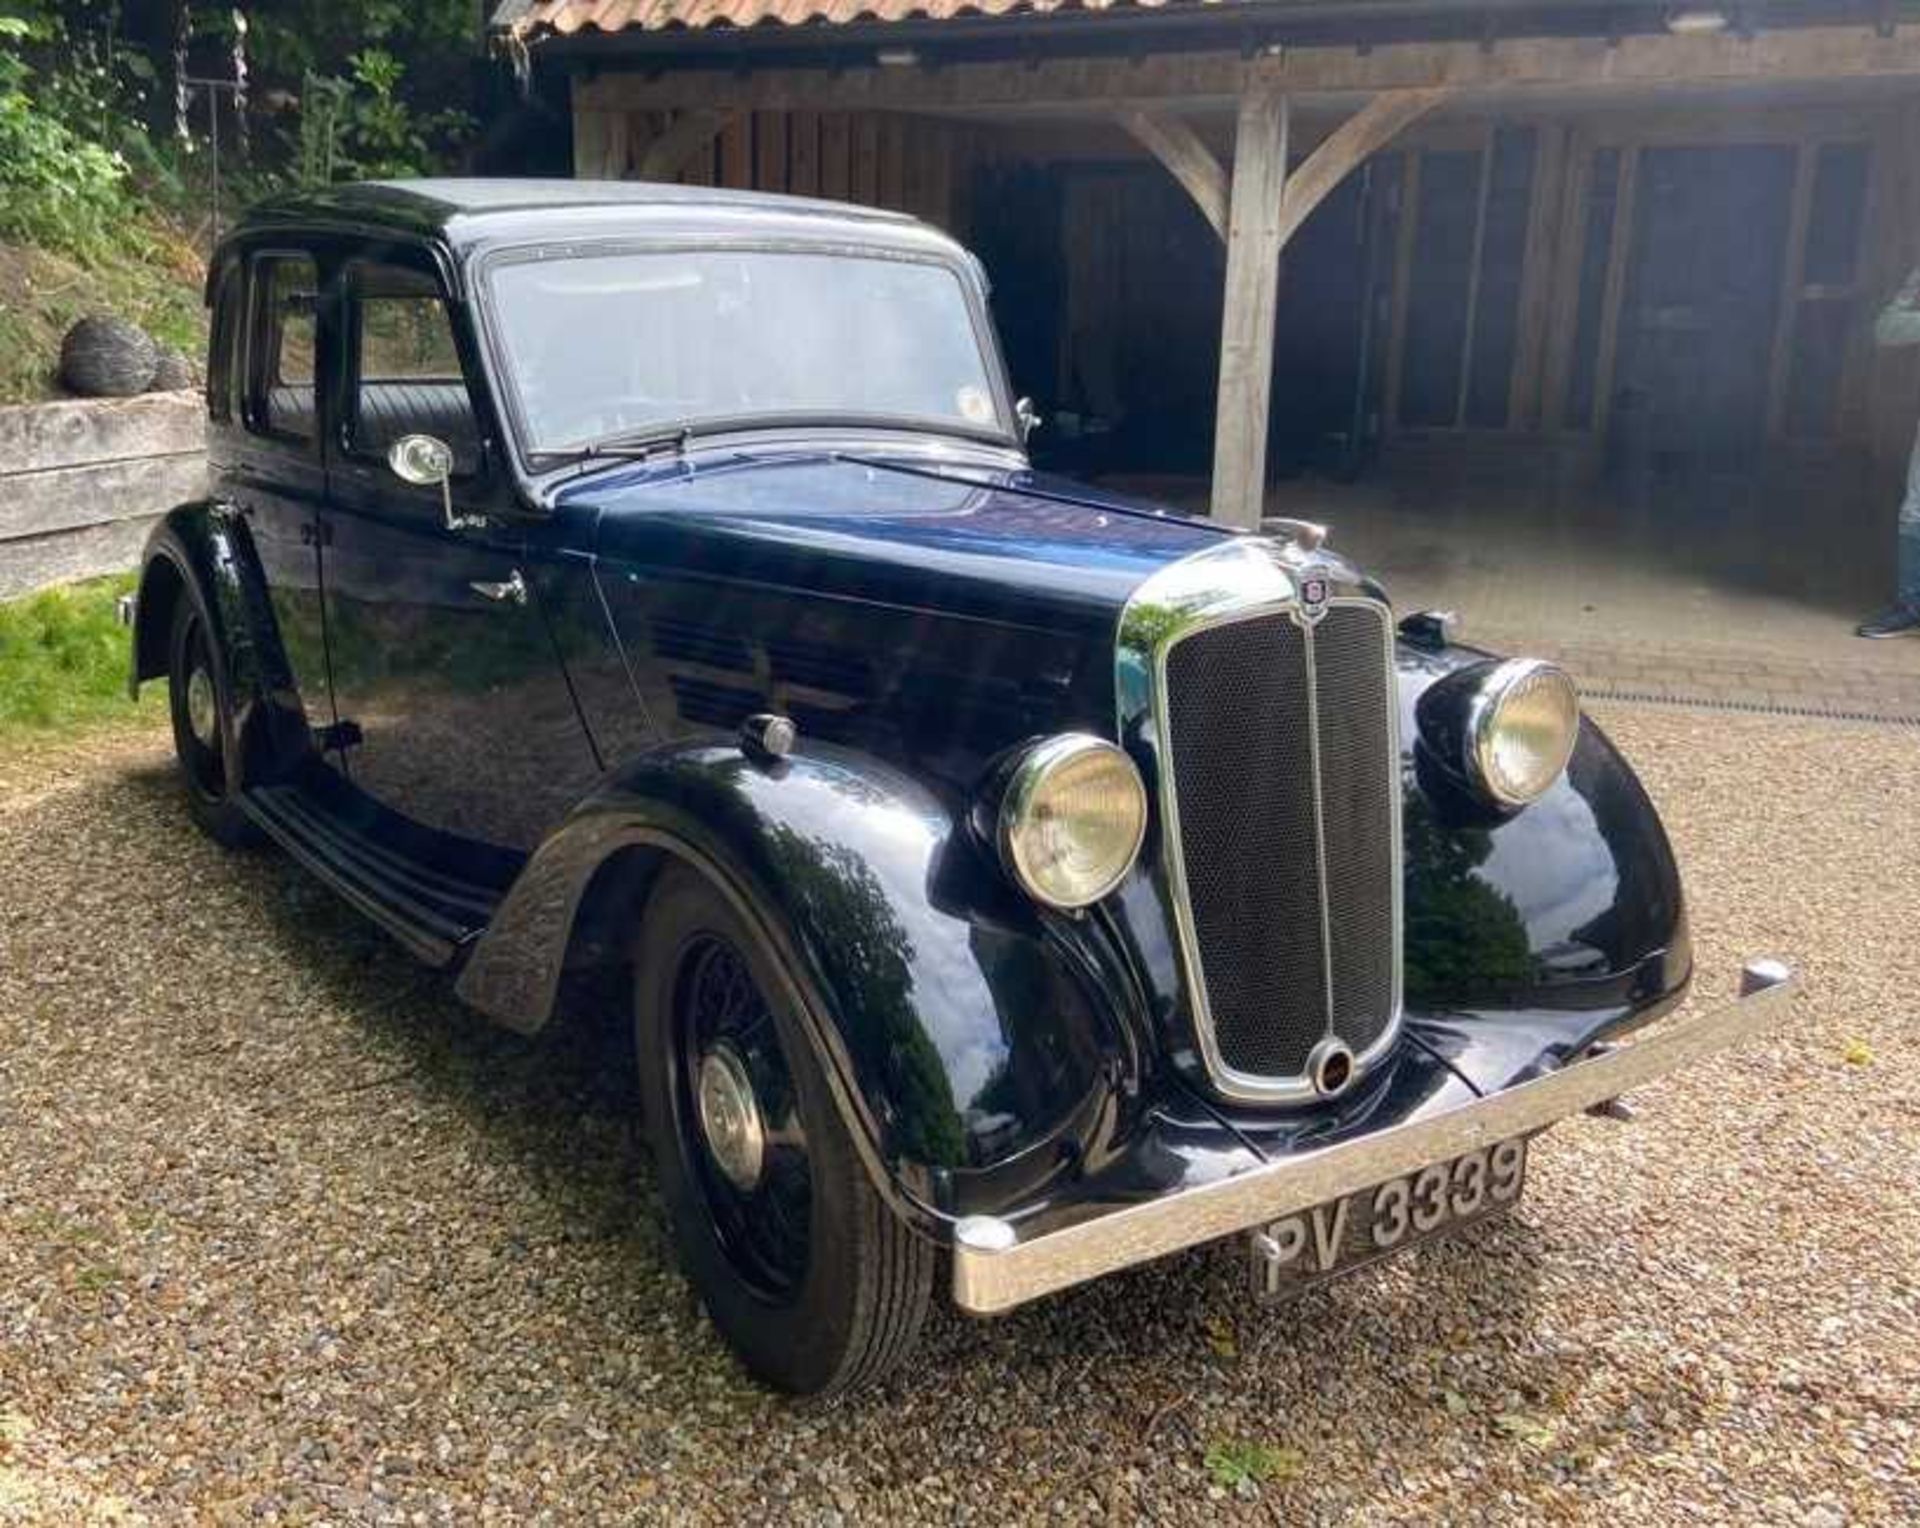 A 1936 Morris 10/4 saloon 1292cc Registration PV339 Odometer 555313 In blue and black Chassis No. - Image 2 of 13